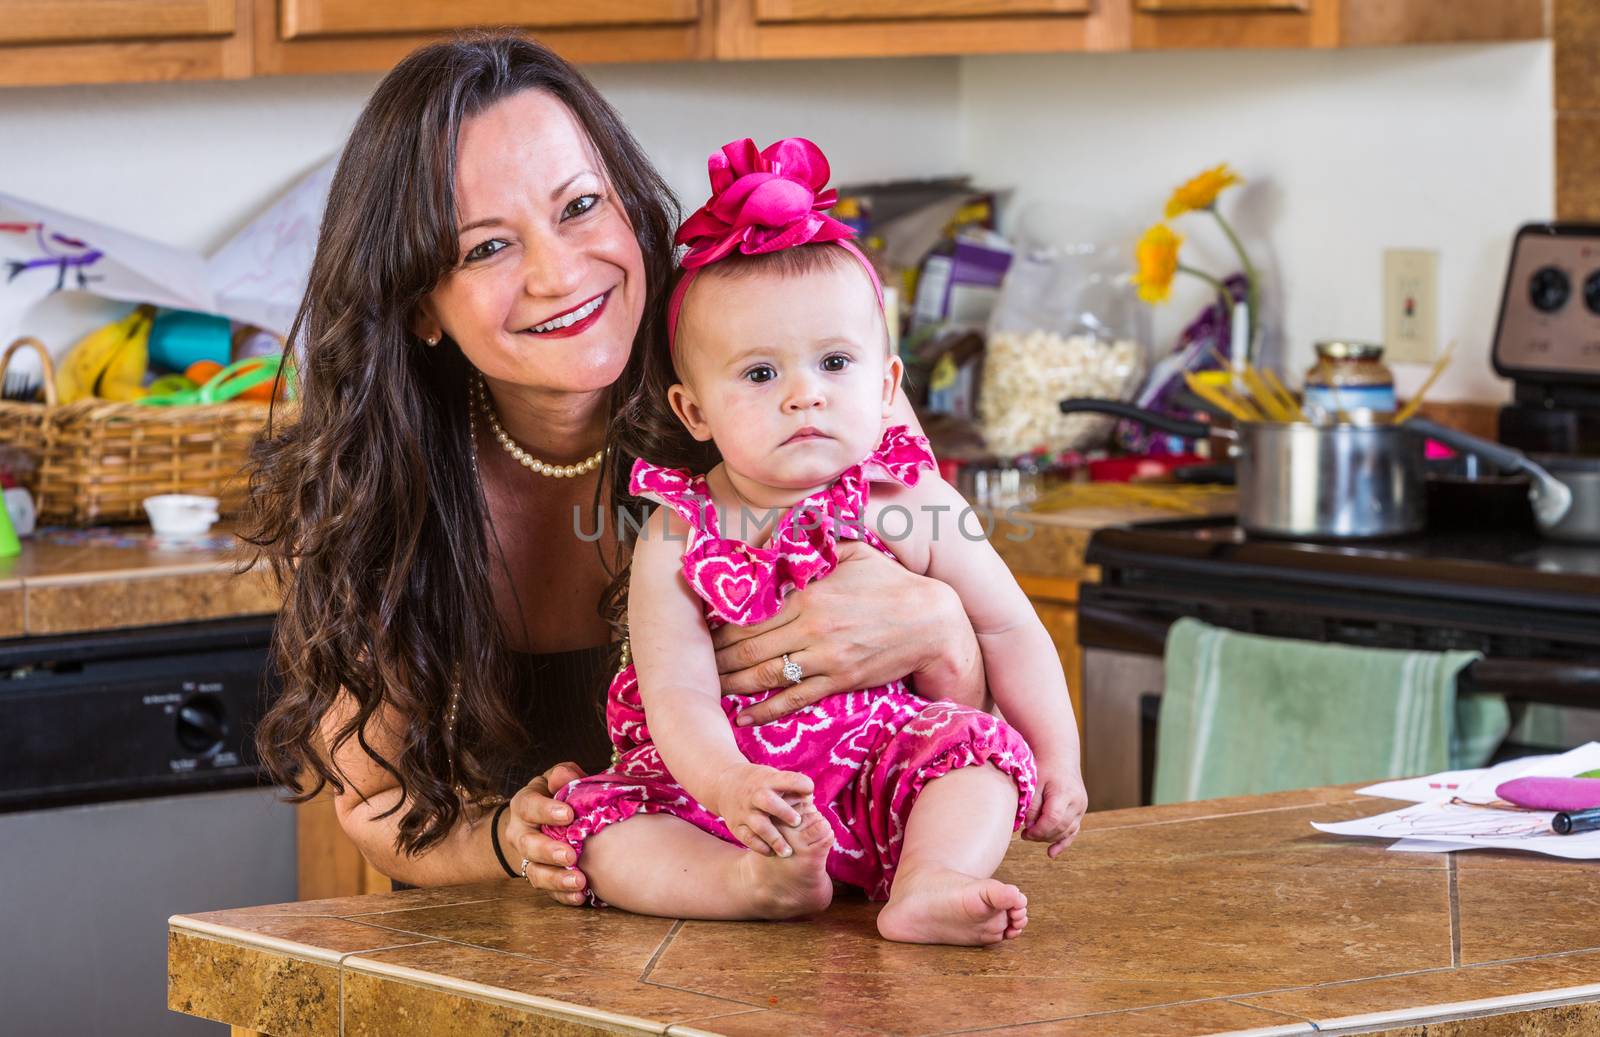 Smiling woman holds her baby in the kitchen